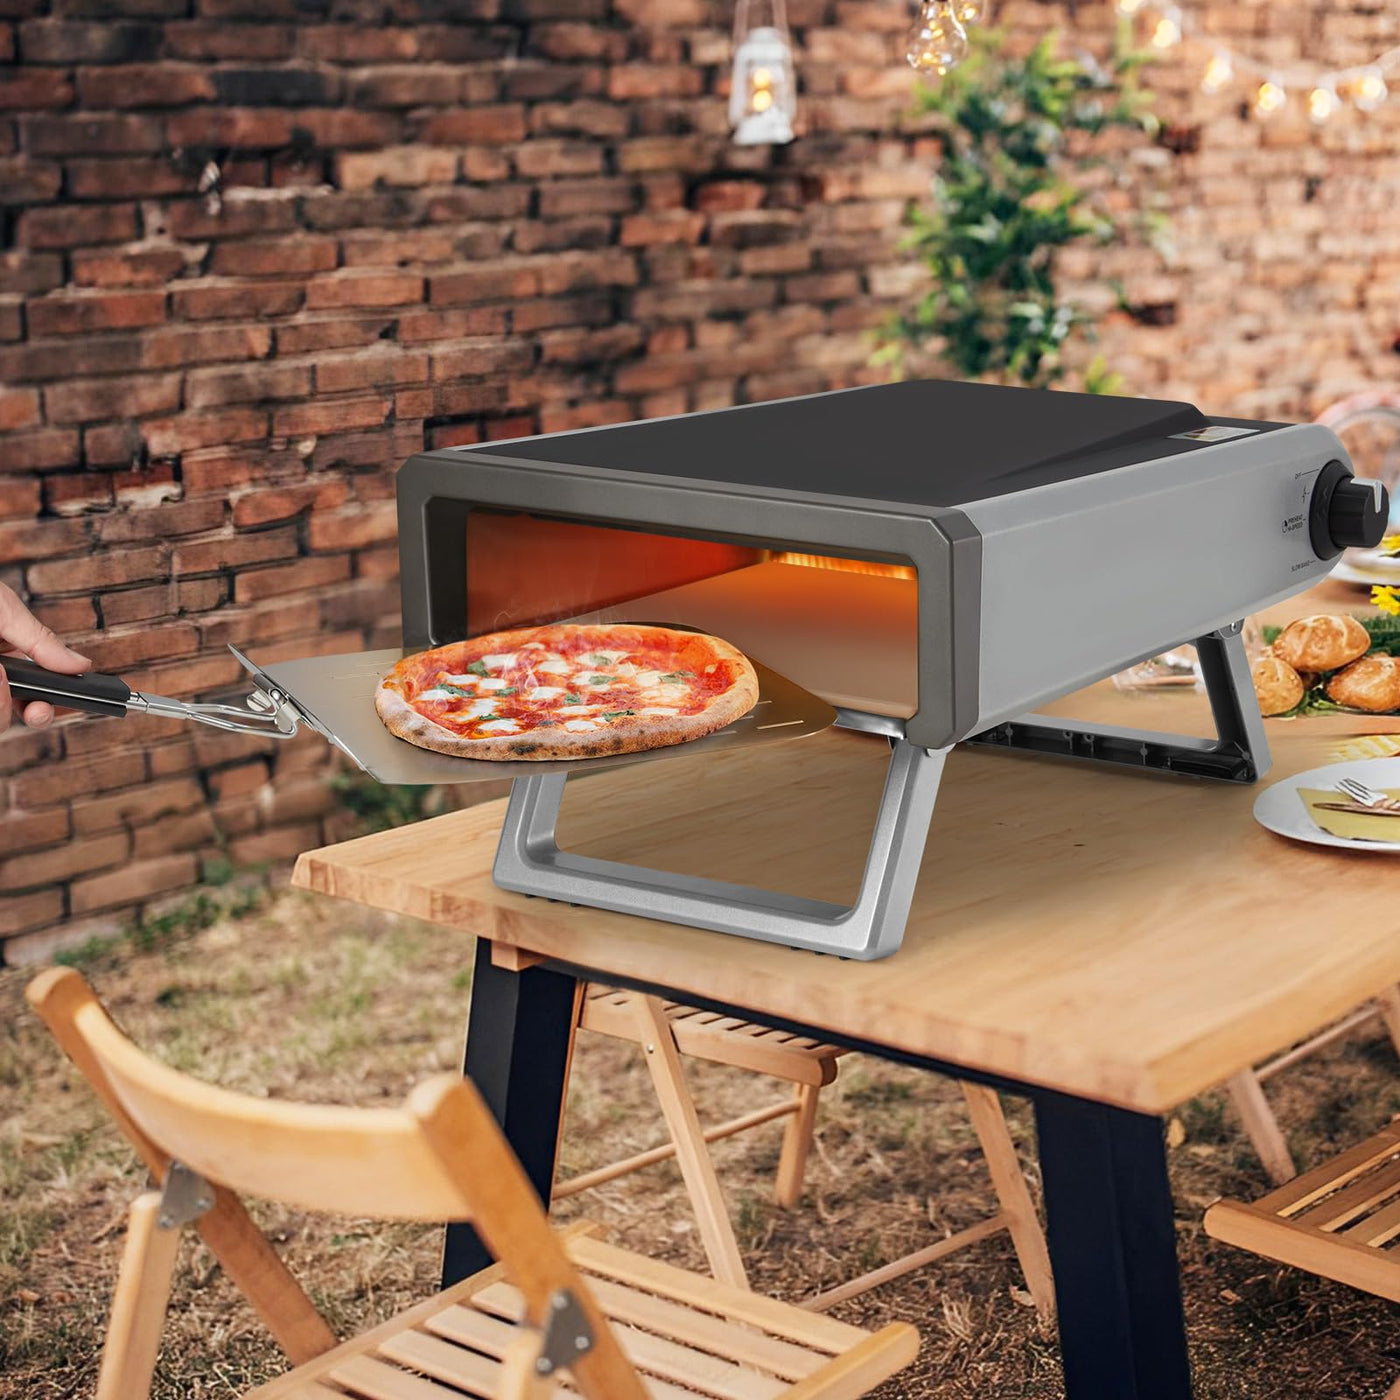 GARVEE Pizza Oven Gas Outdoor 12 Inch Portable Stainless Steel Propane Pizza Oven